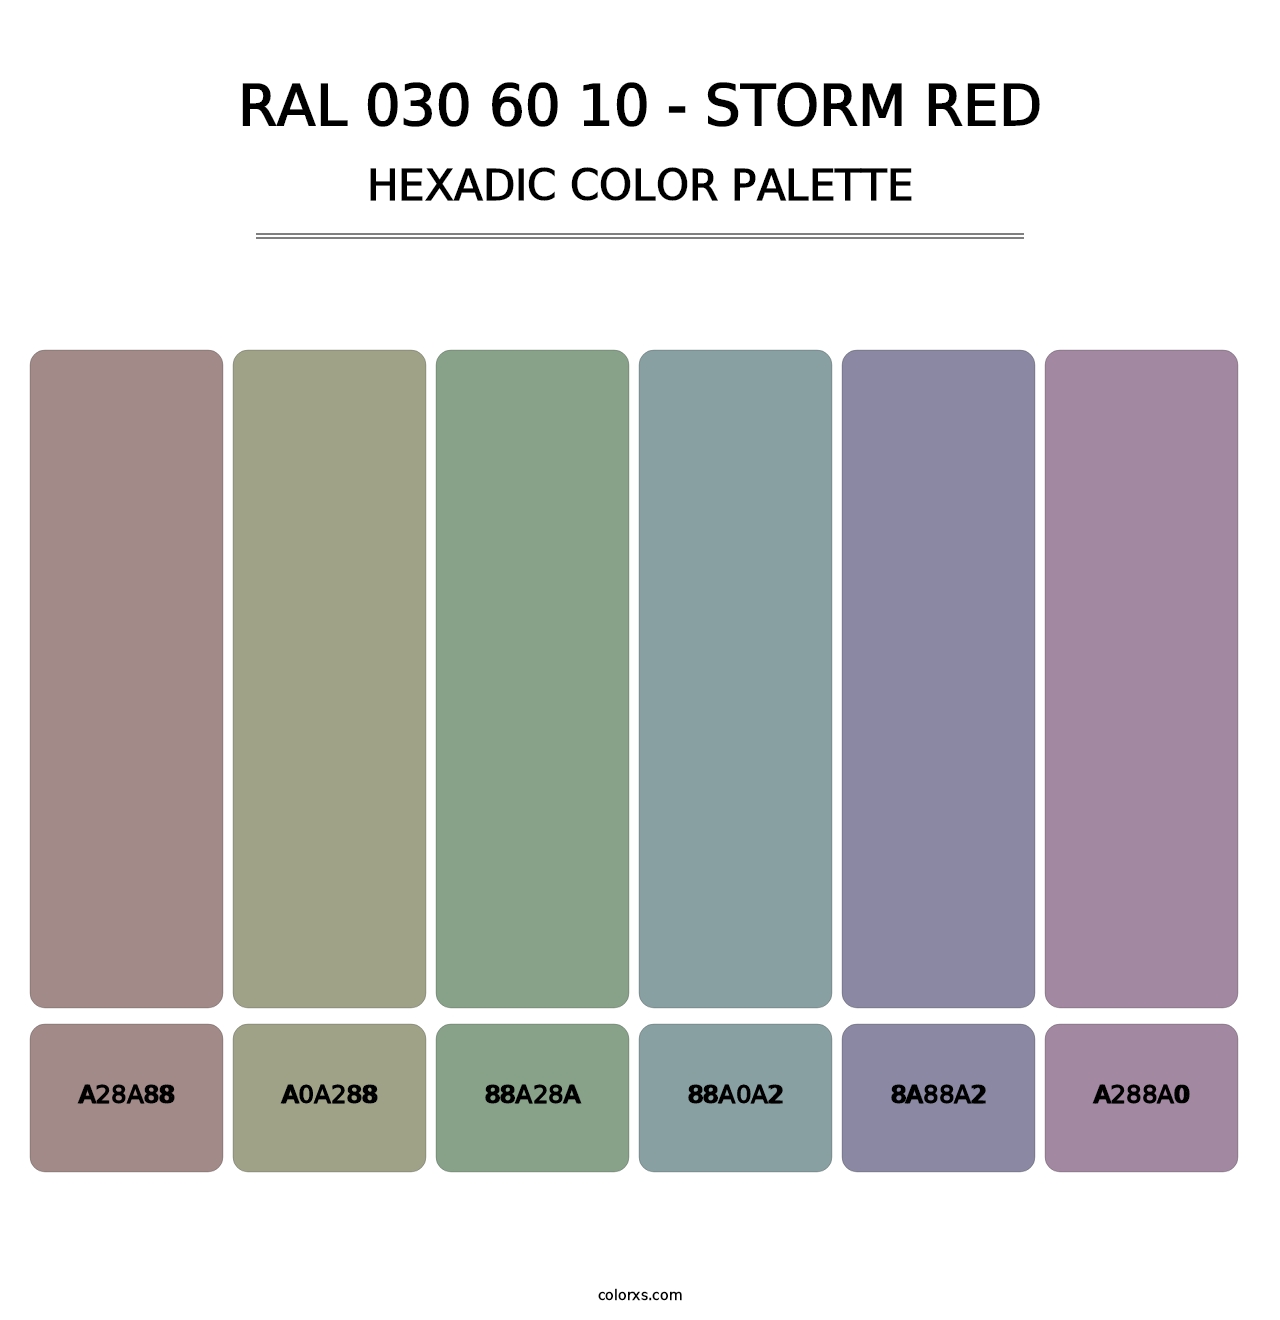 RAL 030 60 10 - Storm Red - Hexadic Color Palette